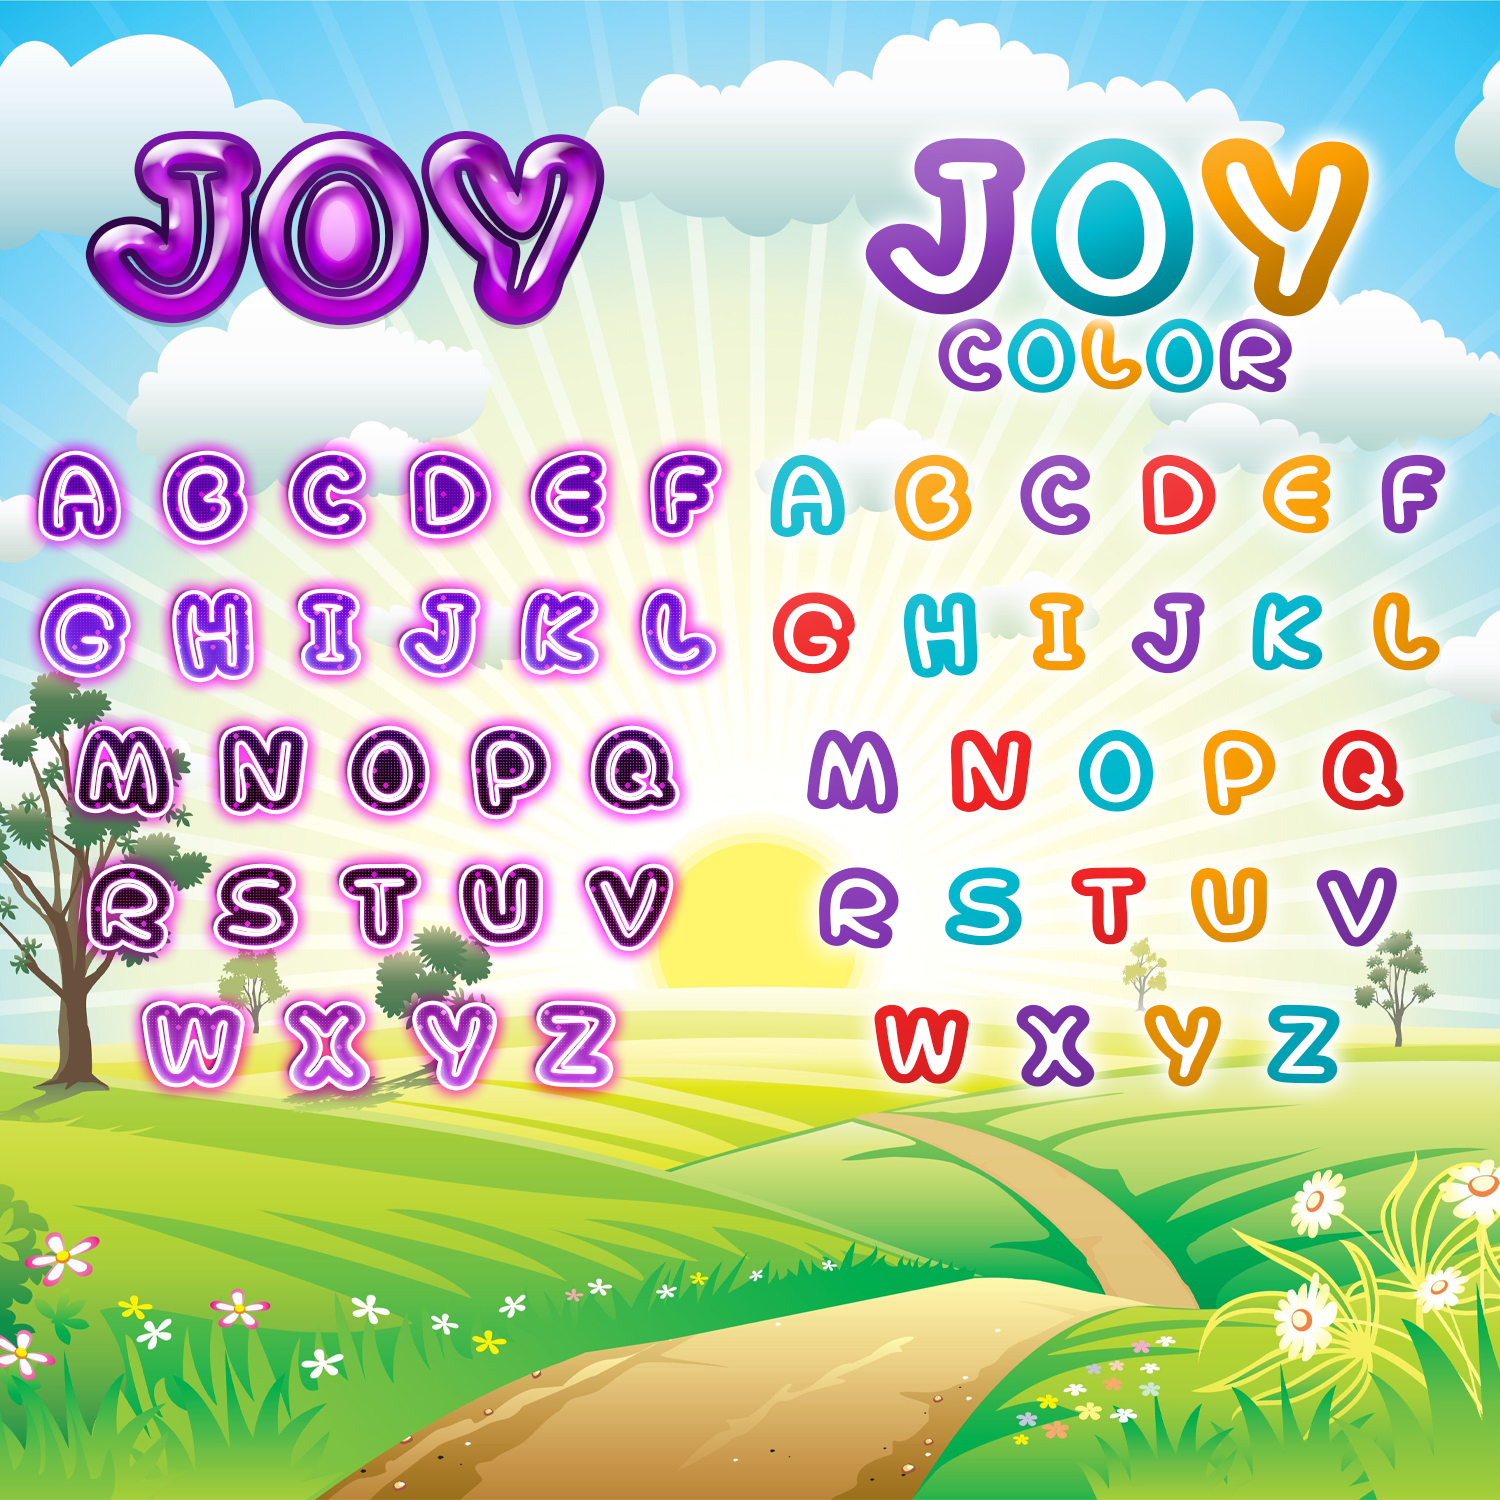 Colored alphabet in the image of the pack.